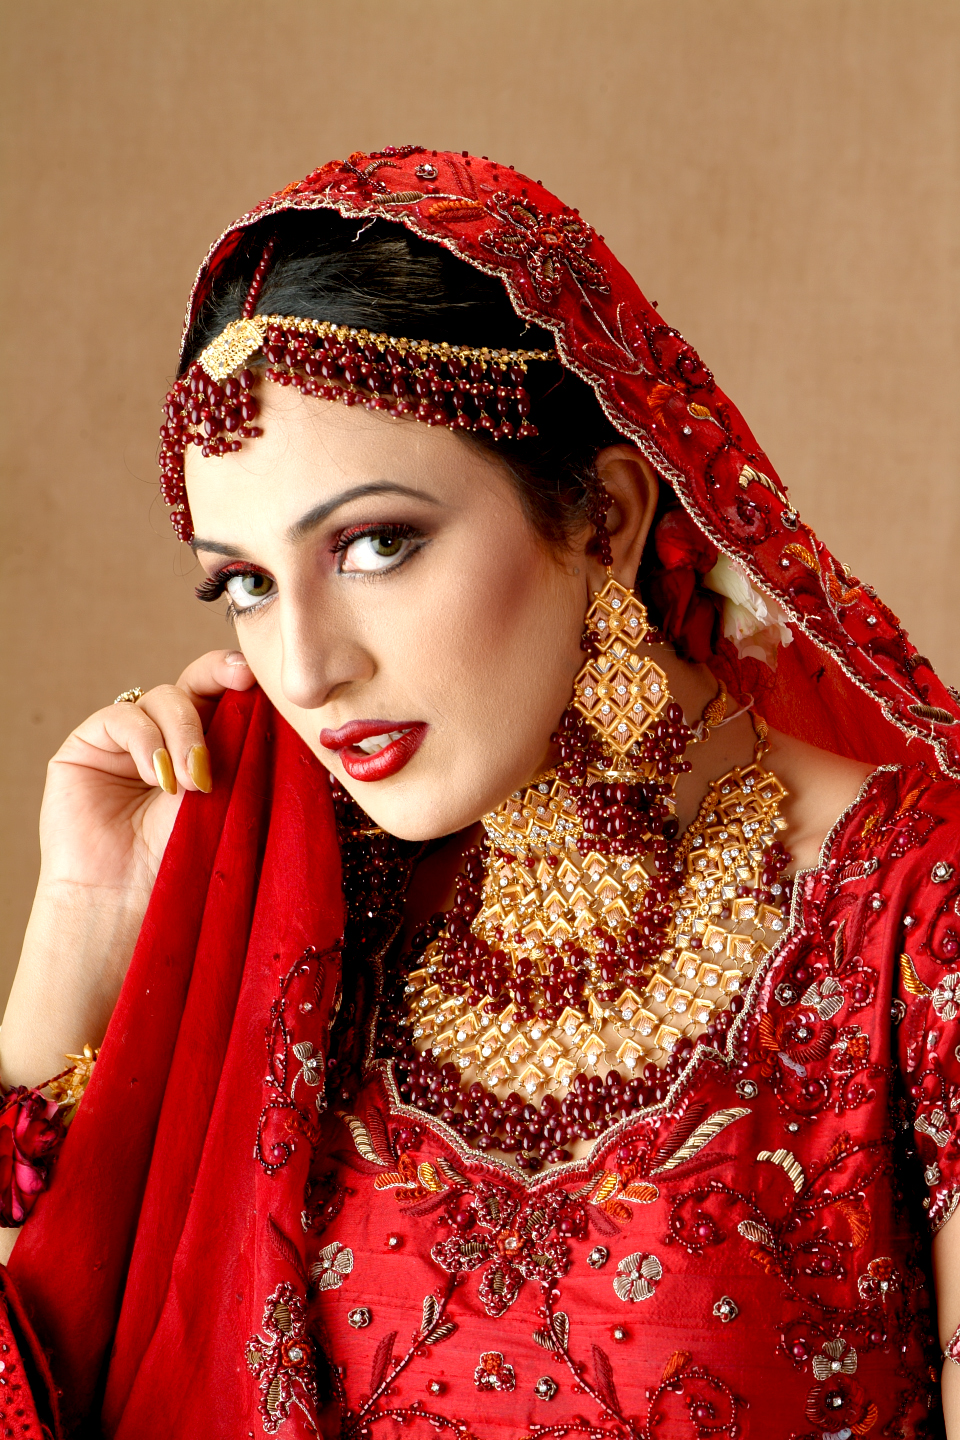 dulhan wallpaper,bride,red,maroon,tradition,headpiece